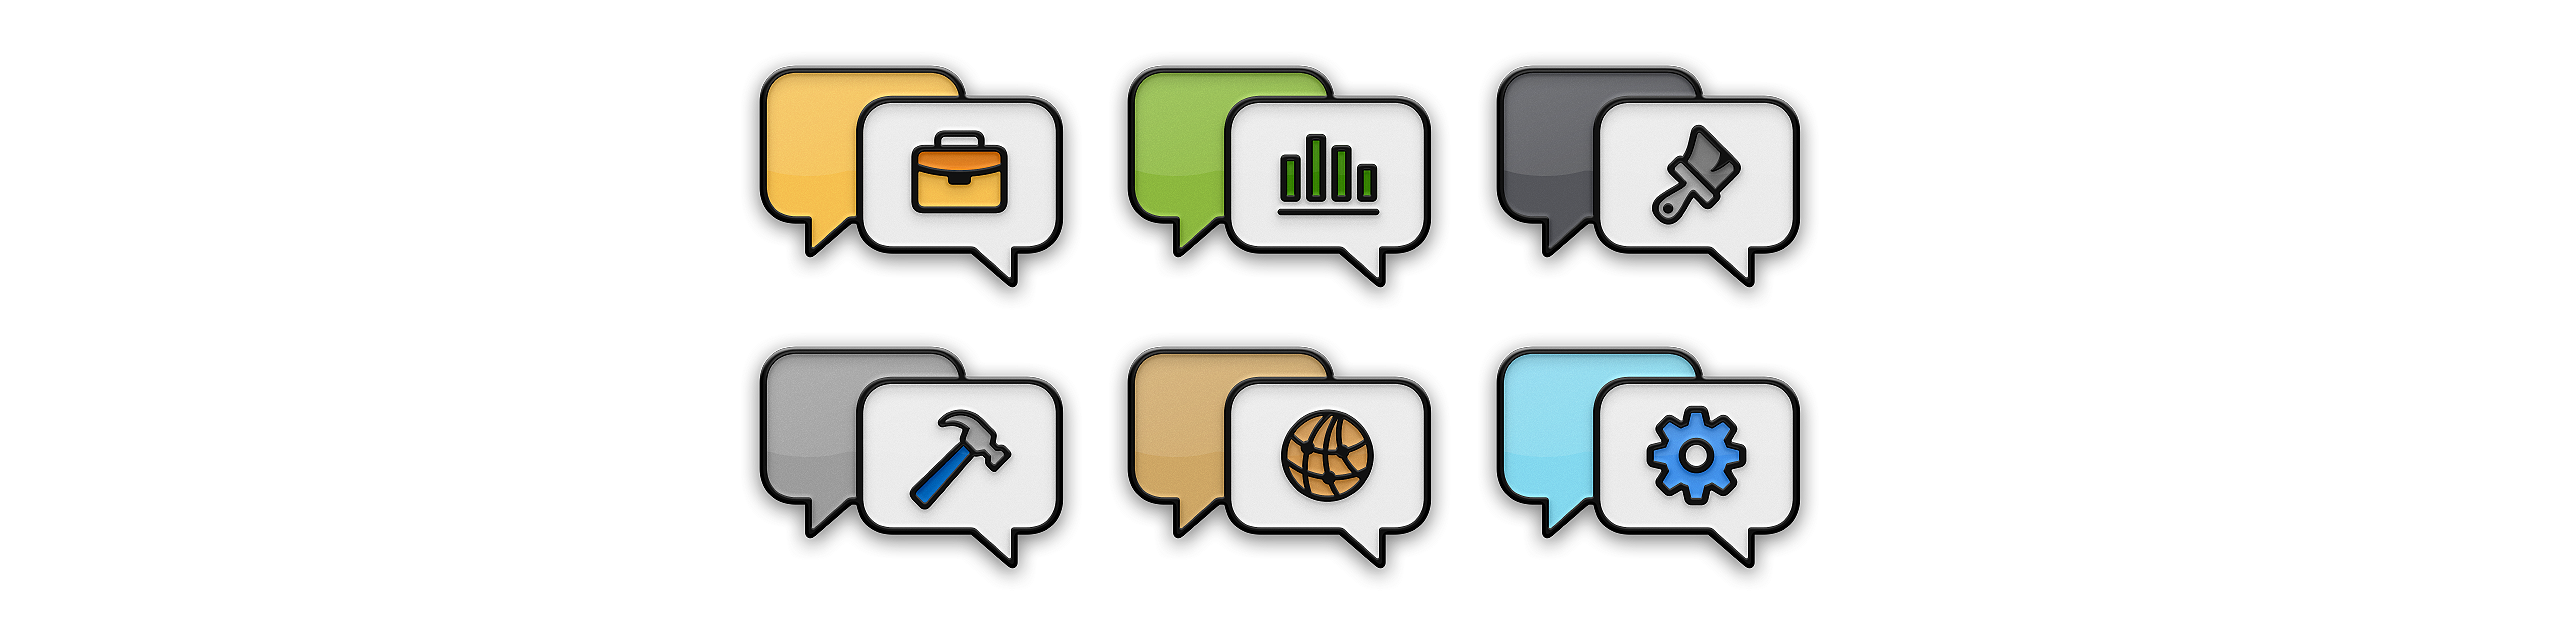 Ask Apple Icons